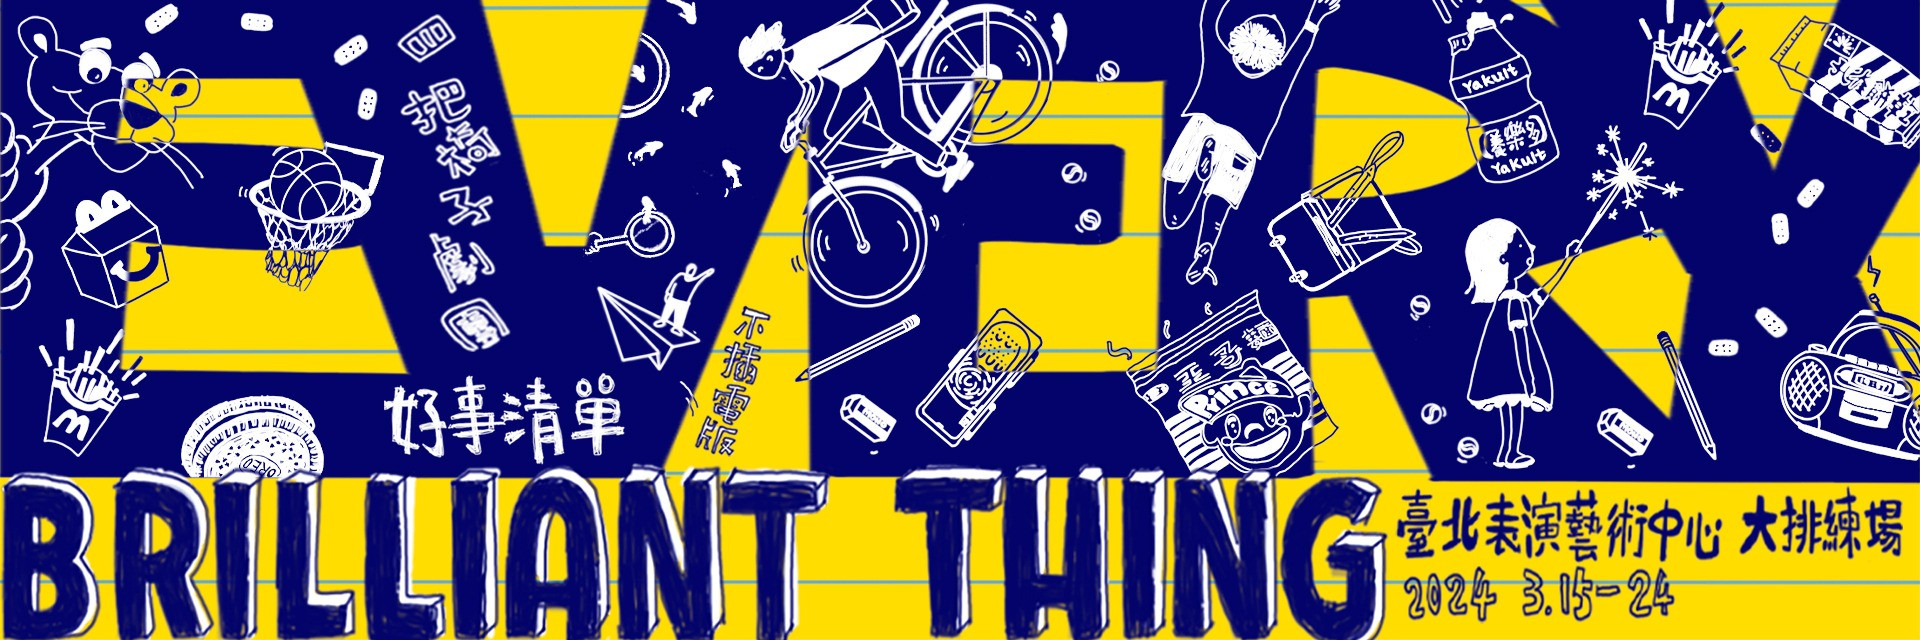 TPAC X 4 CHAIRS THEATRE ：Every Brilliant Thing 主要圖片